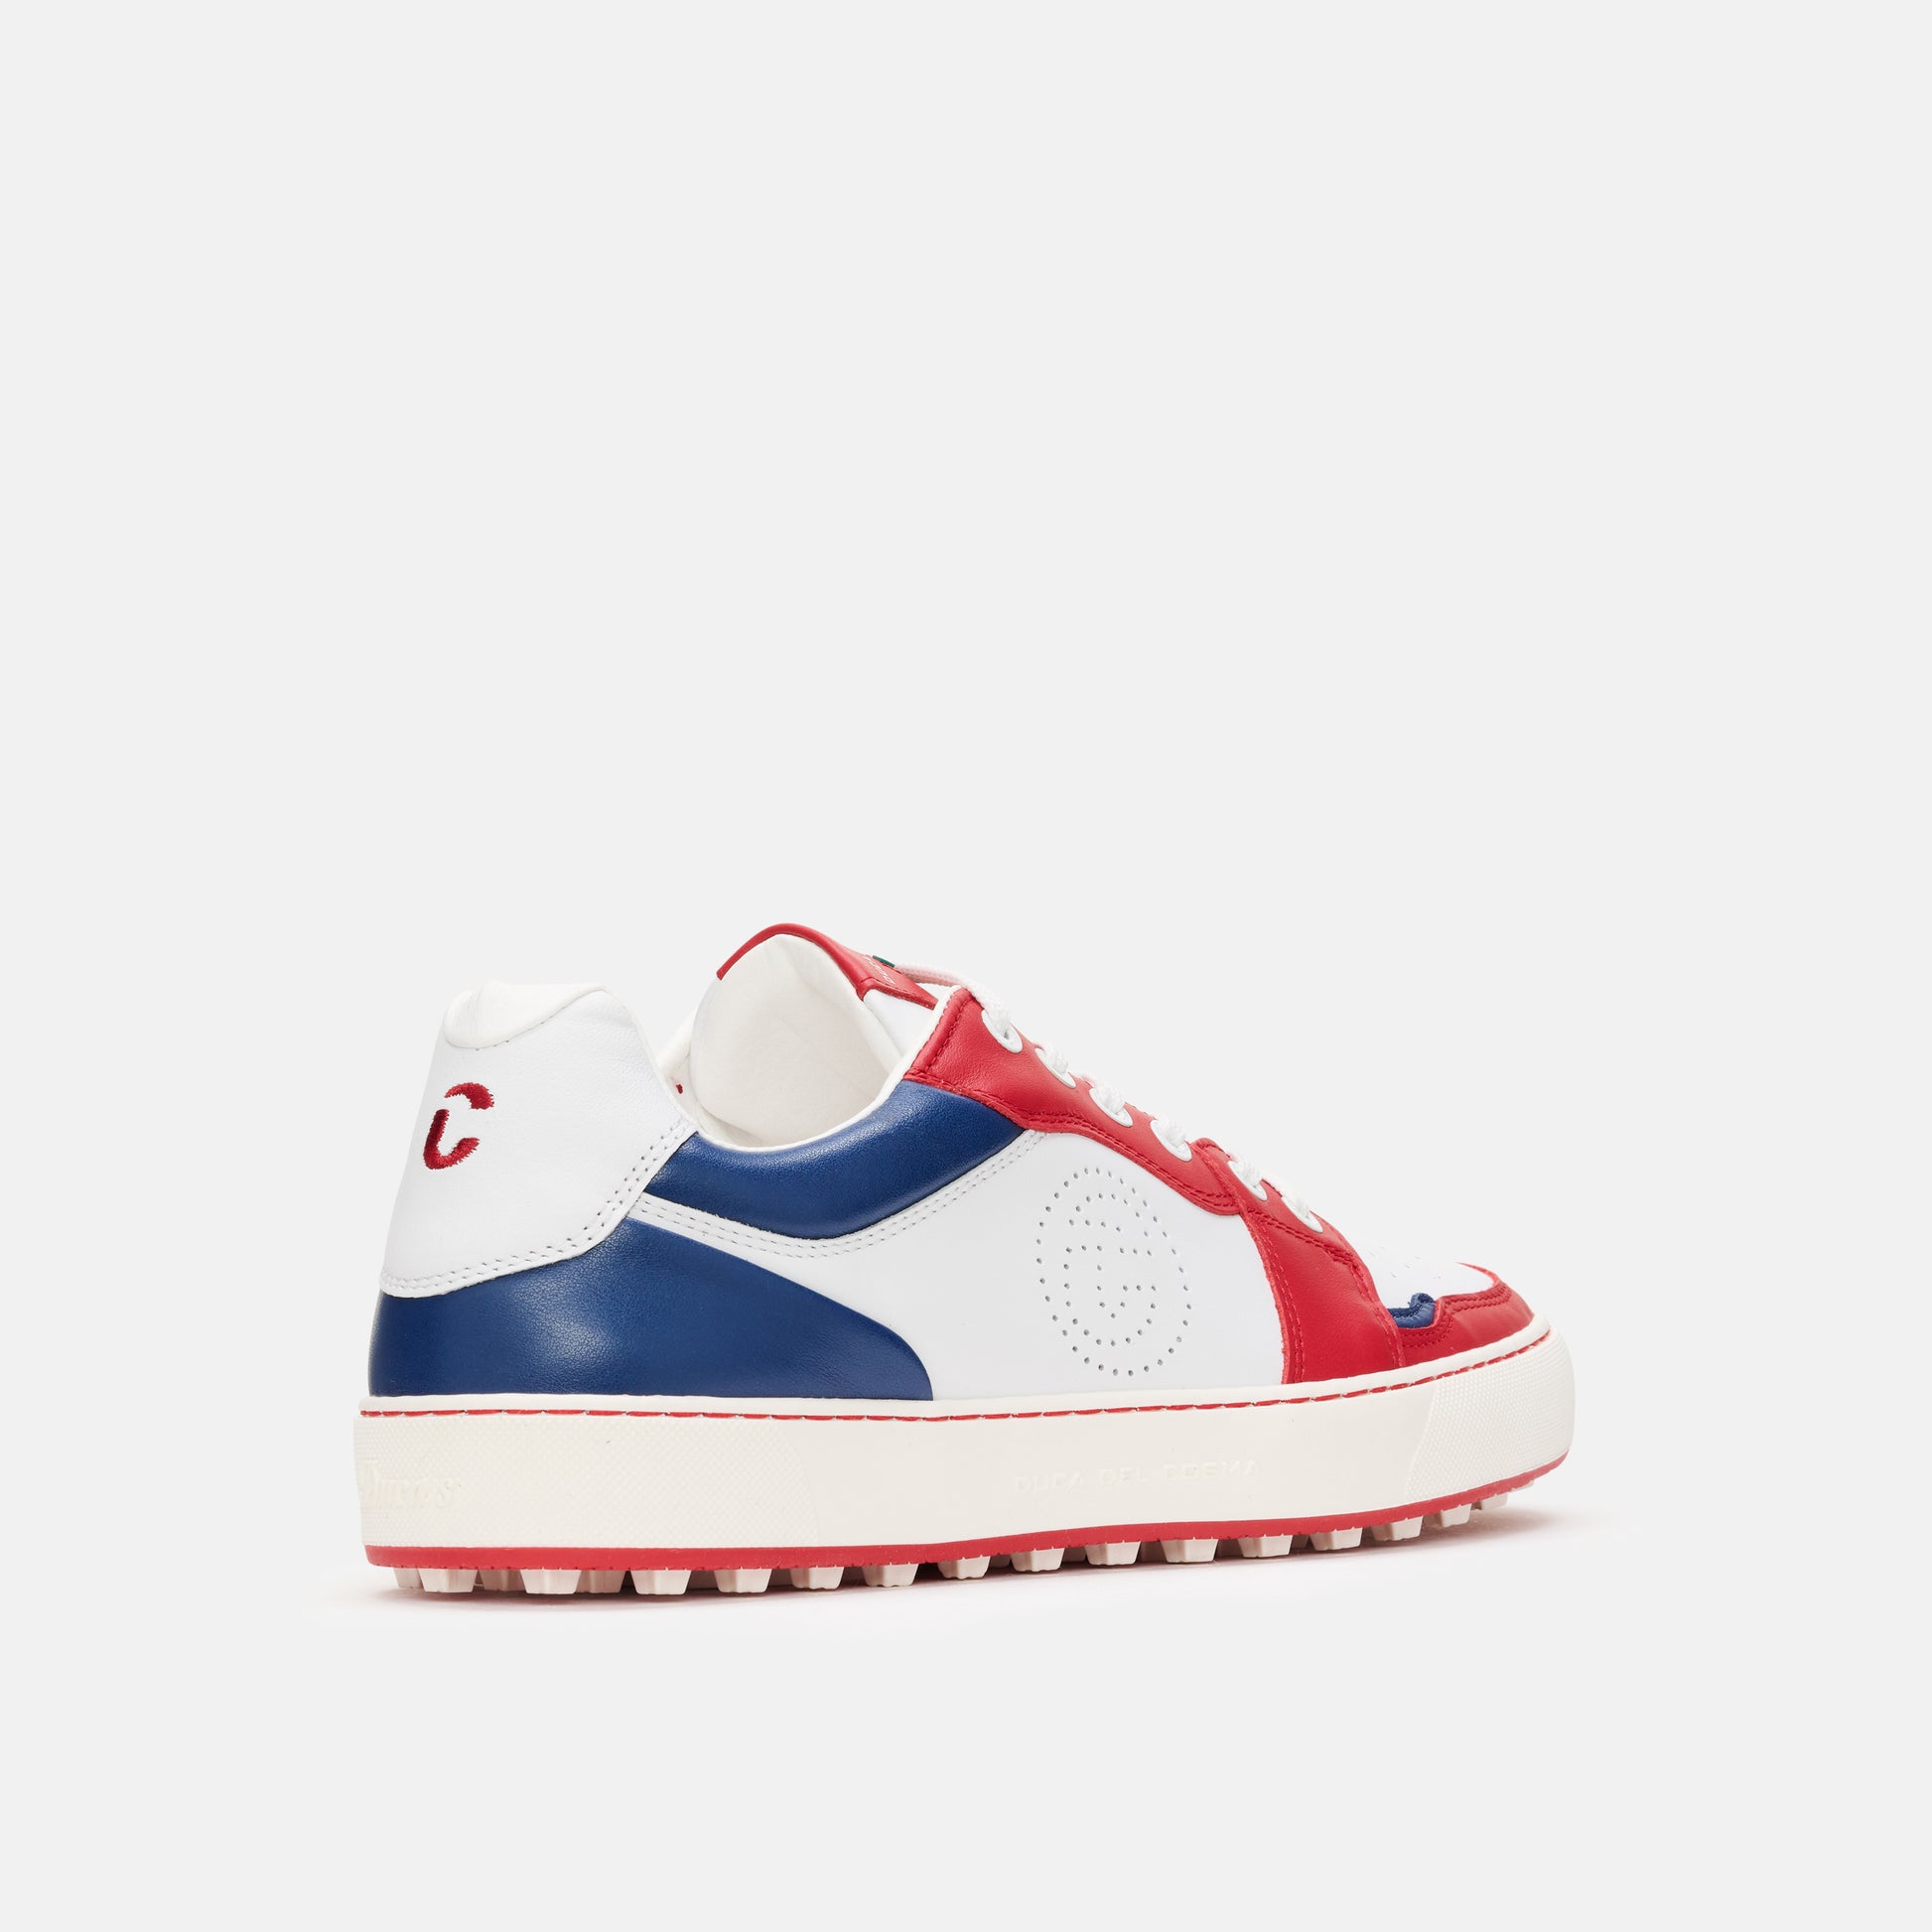 White Golf Shoes, Red Golf Shoes, Navy Golf Shoes, Spikeless Golf Shoes, Duca del Cosma Men's Golf Shoes, Sneaker golf shoes.